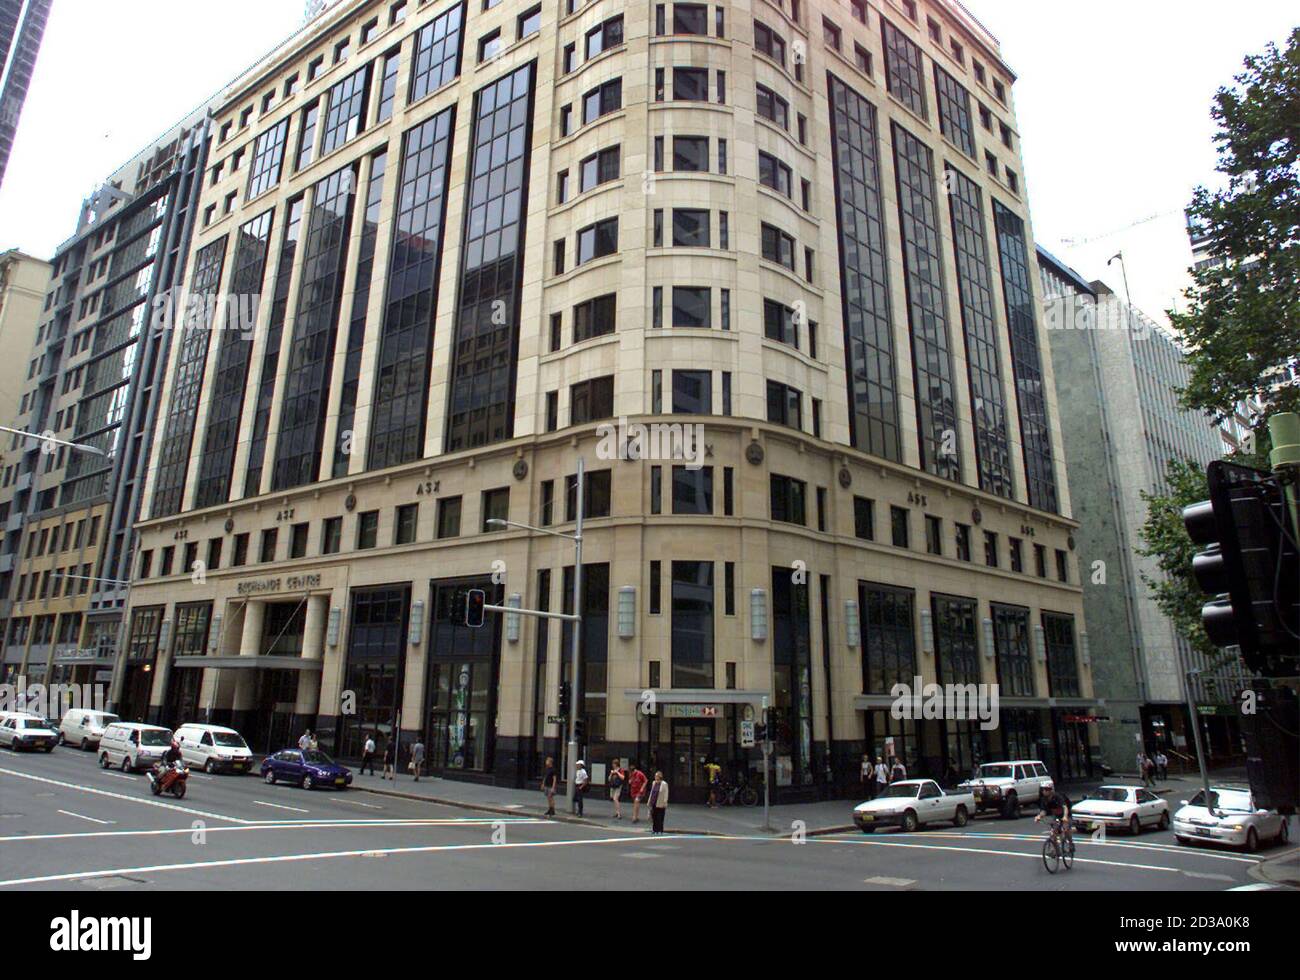 The Australian is pictured in Street in the city centre February 27, 2001. The Australian Stock Exchange is a fully automated clearing for Australian stocks and securities. WB/DL